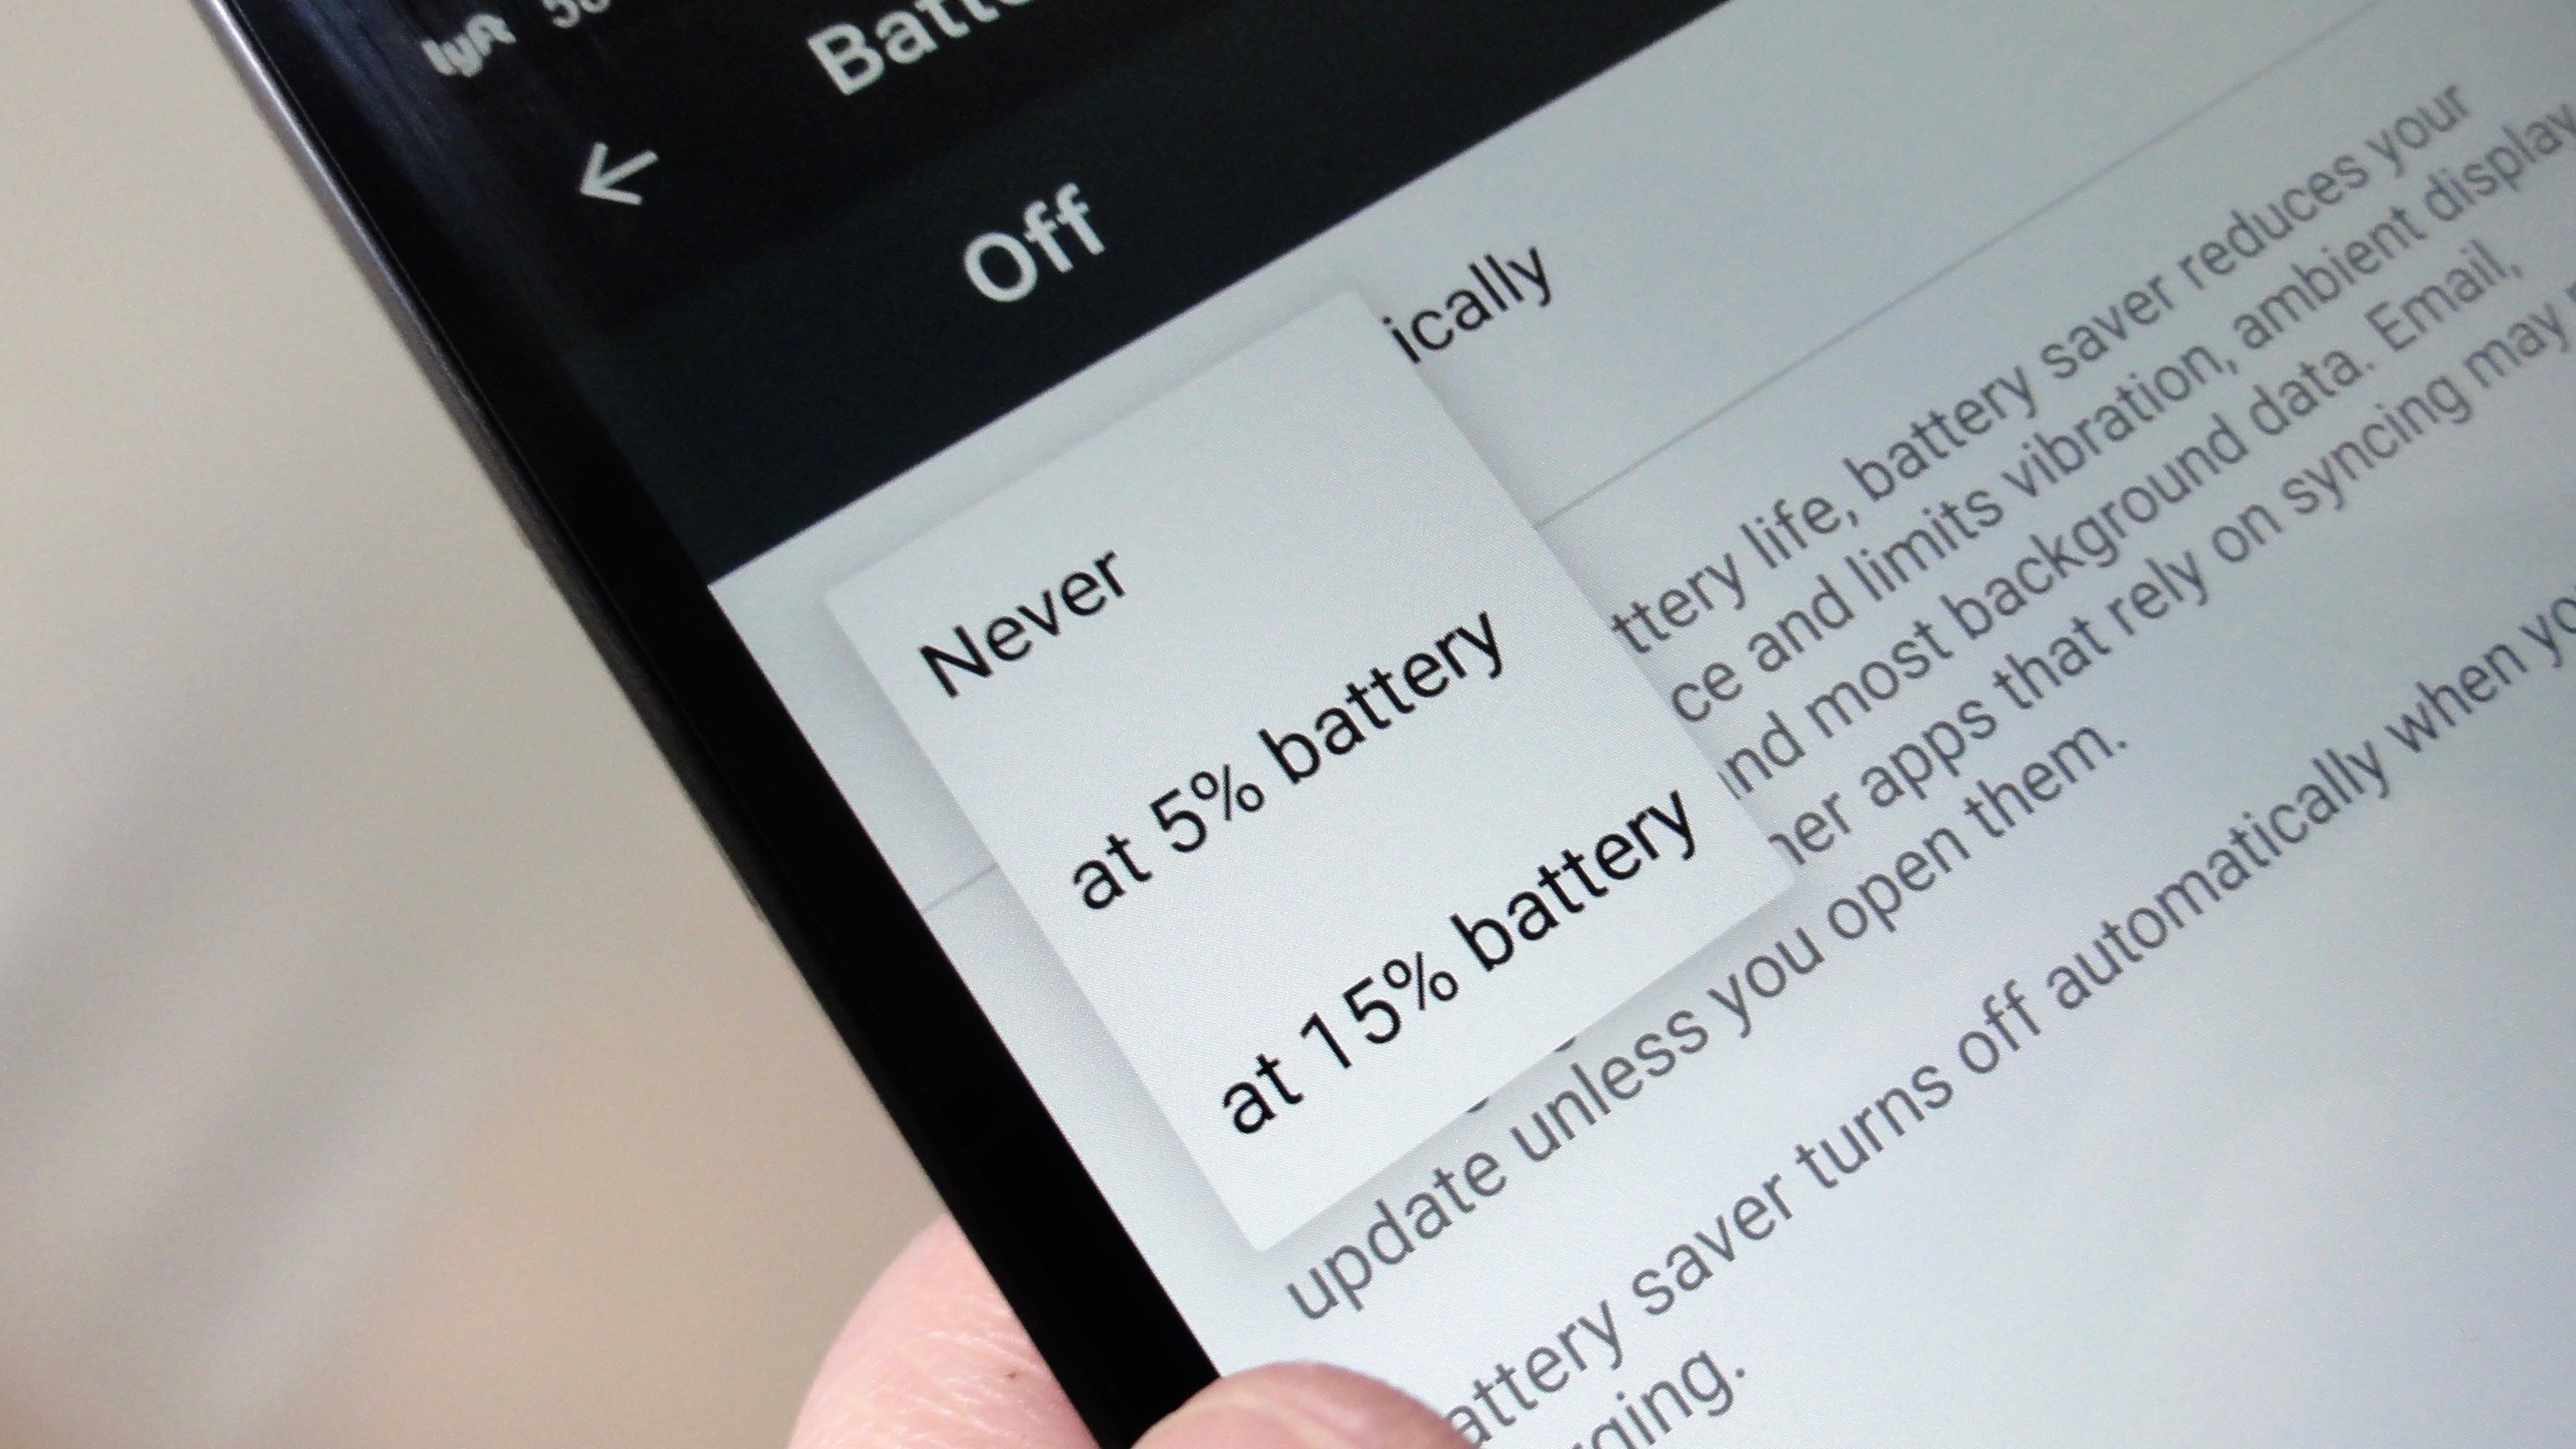 Set Battery Saver To Turn Itself On Automatically 
 - Android - HD Wallpaper 